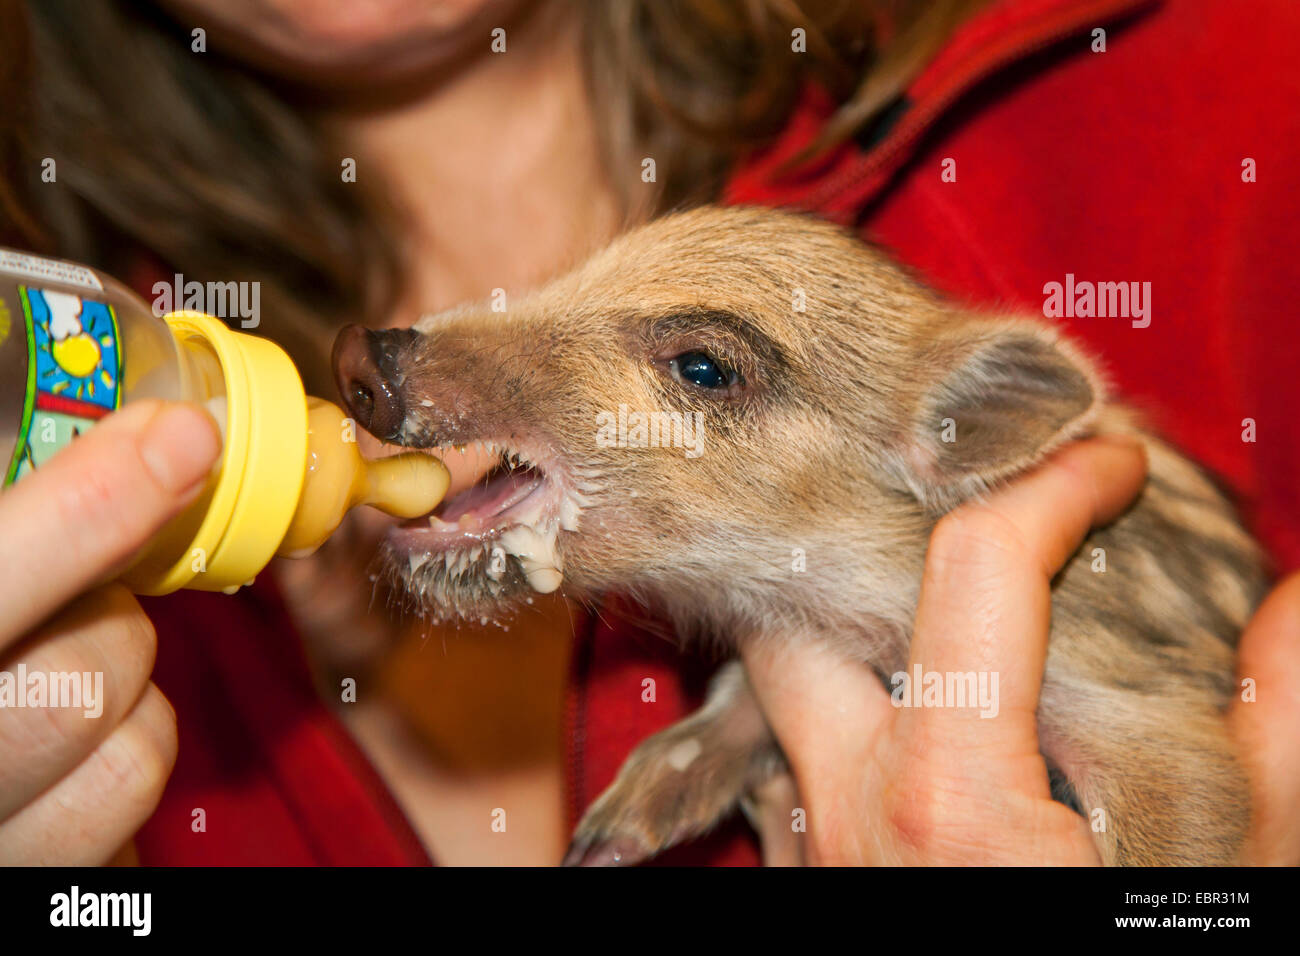 wild boar, pig, wild boar (Sus scrofa), piglet is brought up on the bottle, Germany Stock Photo